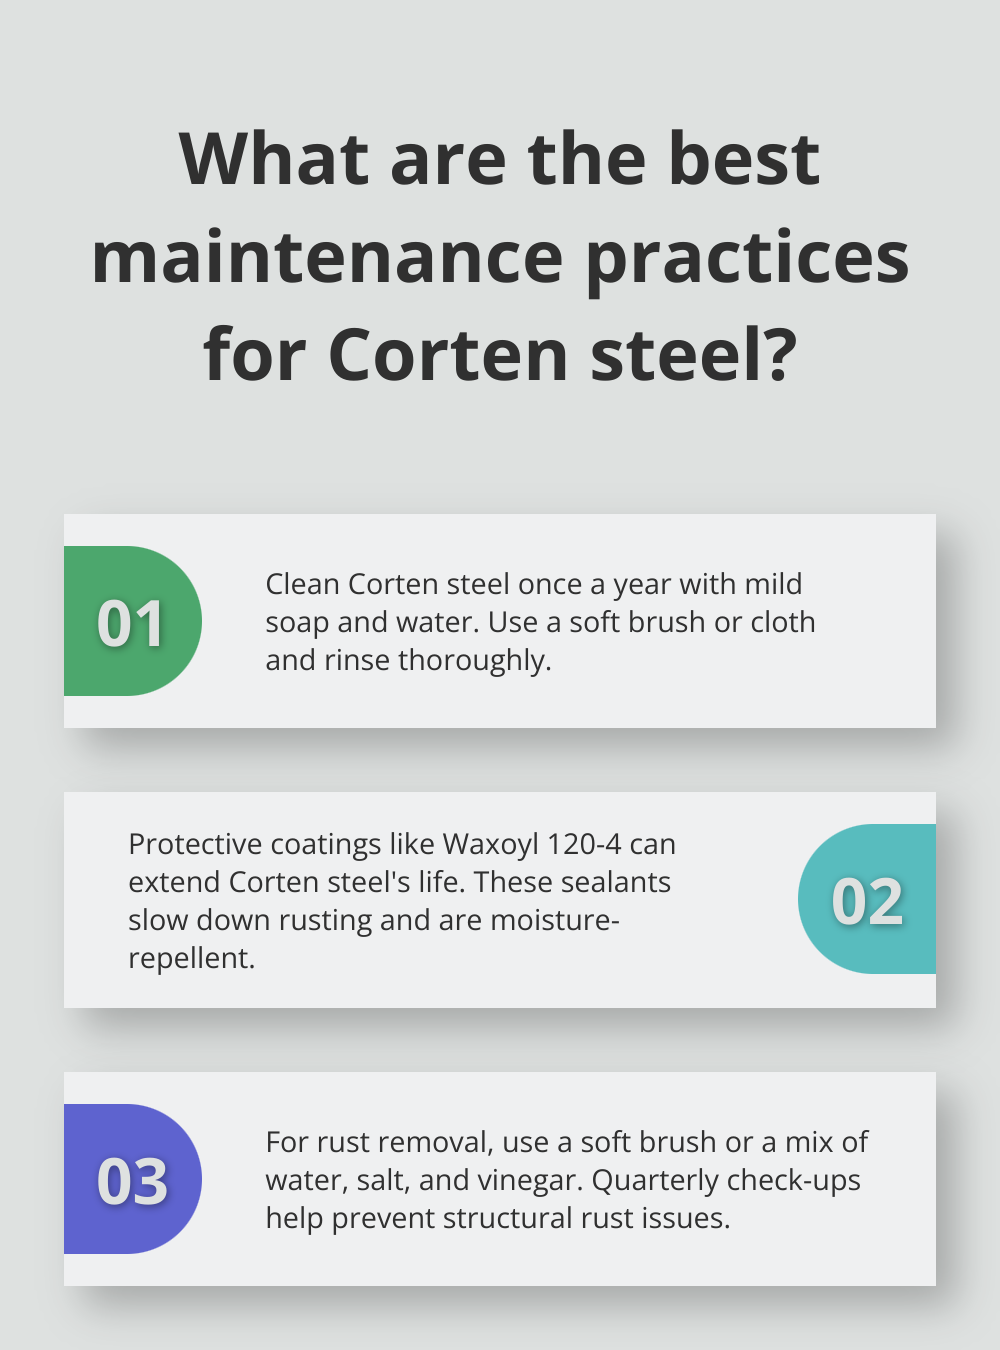 Fact - What are the best maintenance practices for Corten steel?